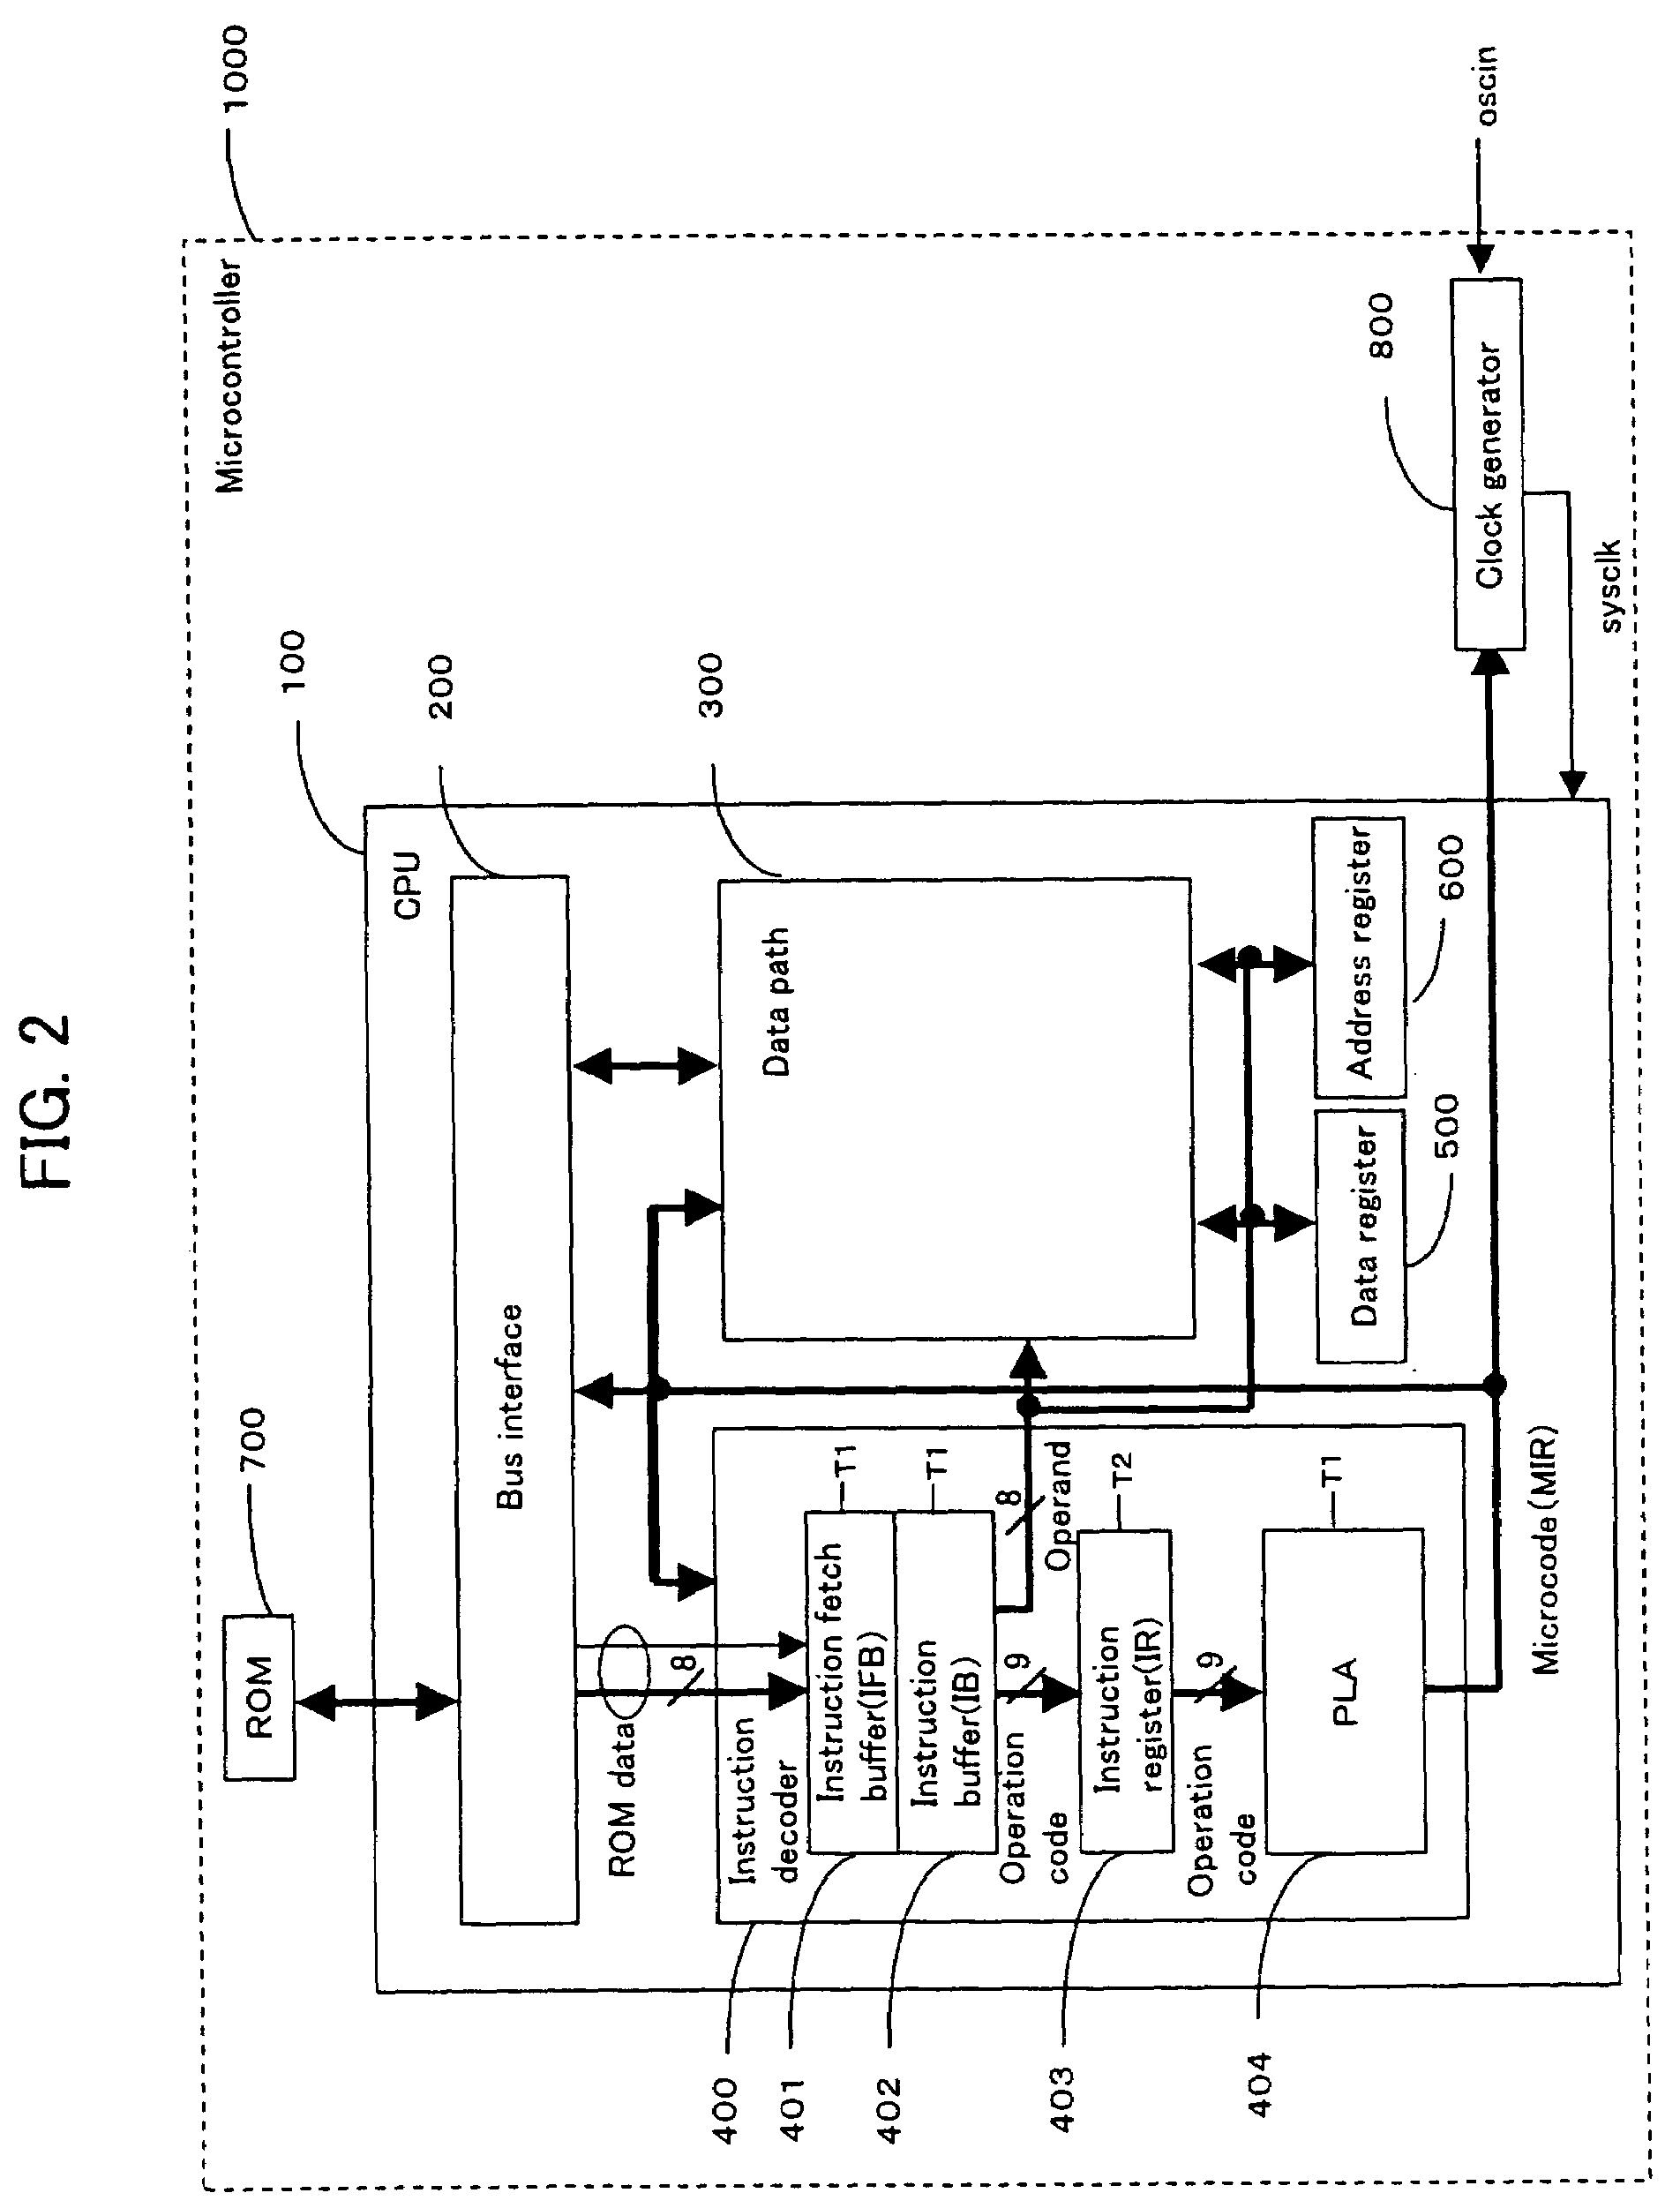 Microcontroller for fetching and decoding a frequency control signal together with an operation code